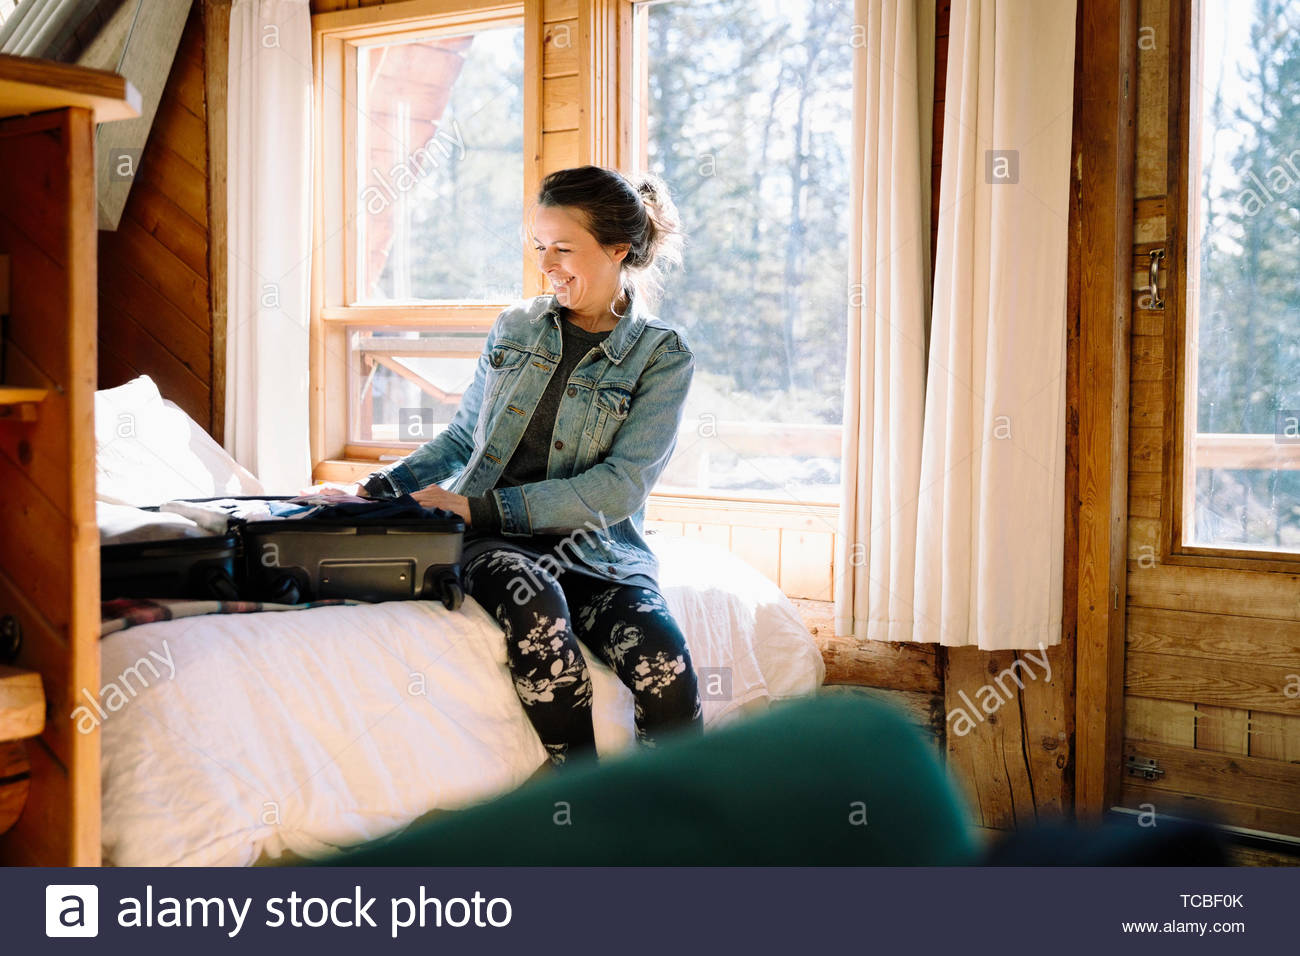 Smiling woman unpacking in cabin Stock Photo